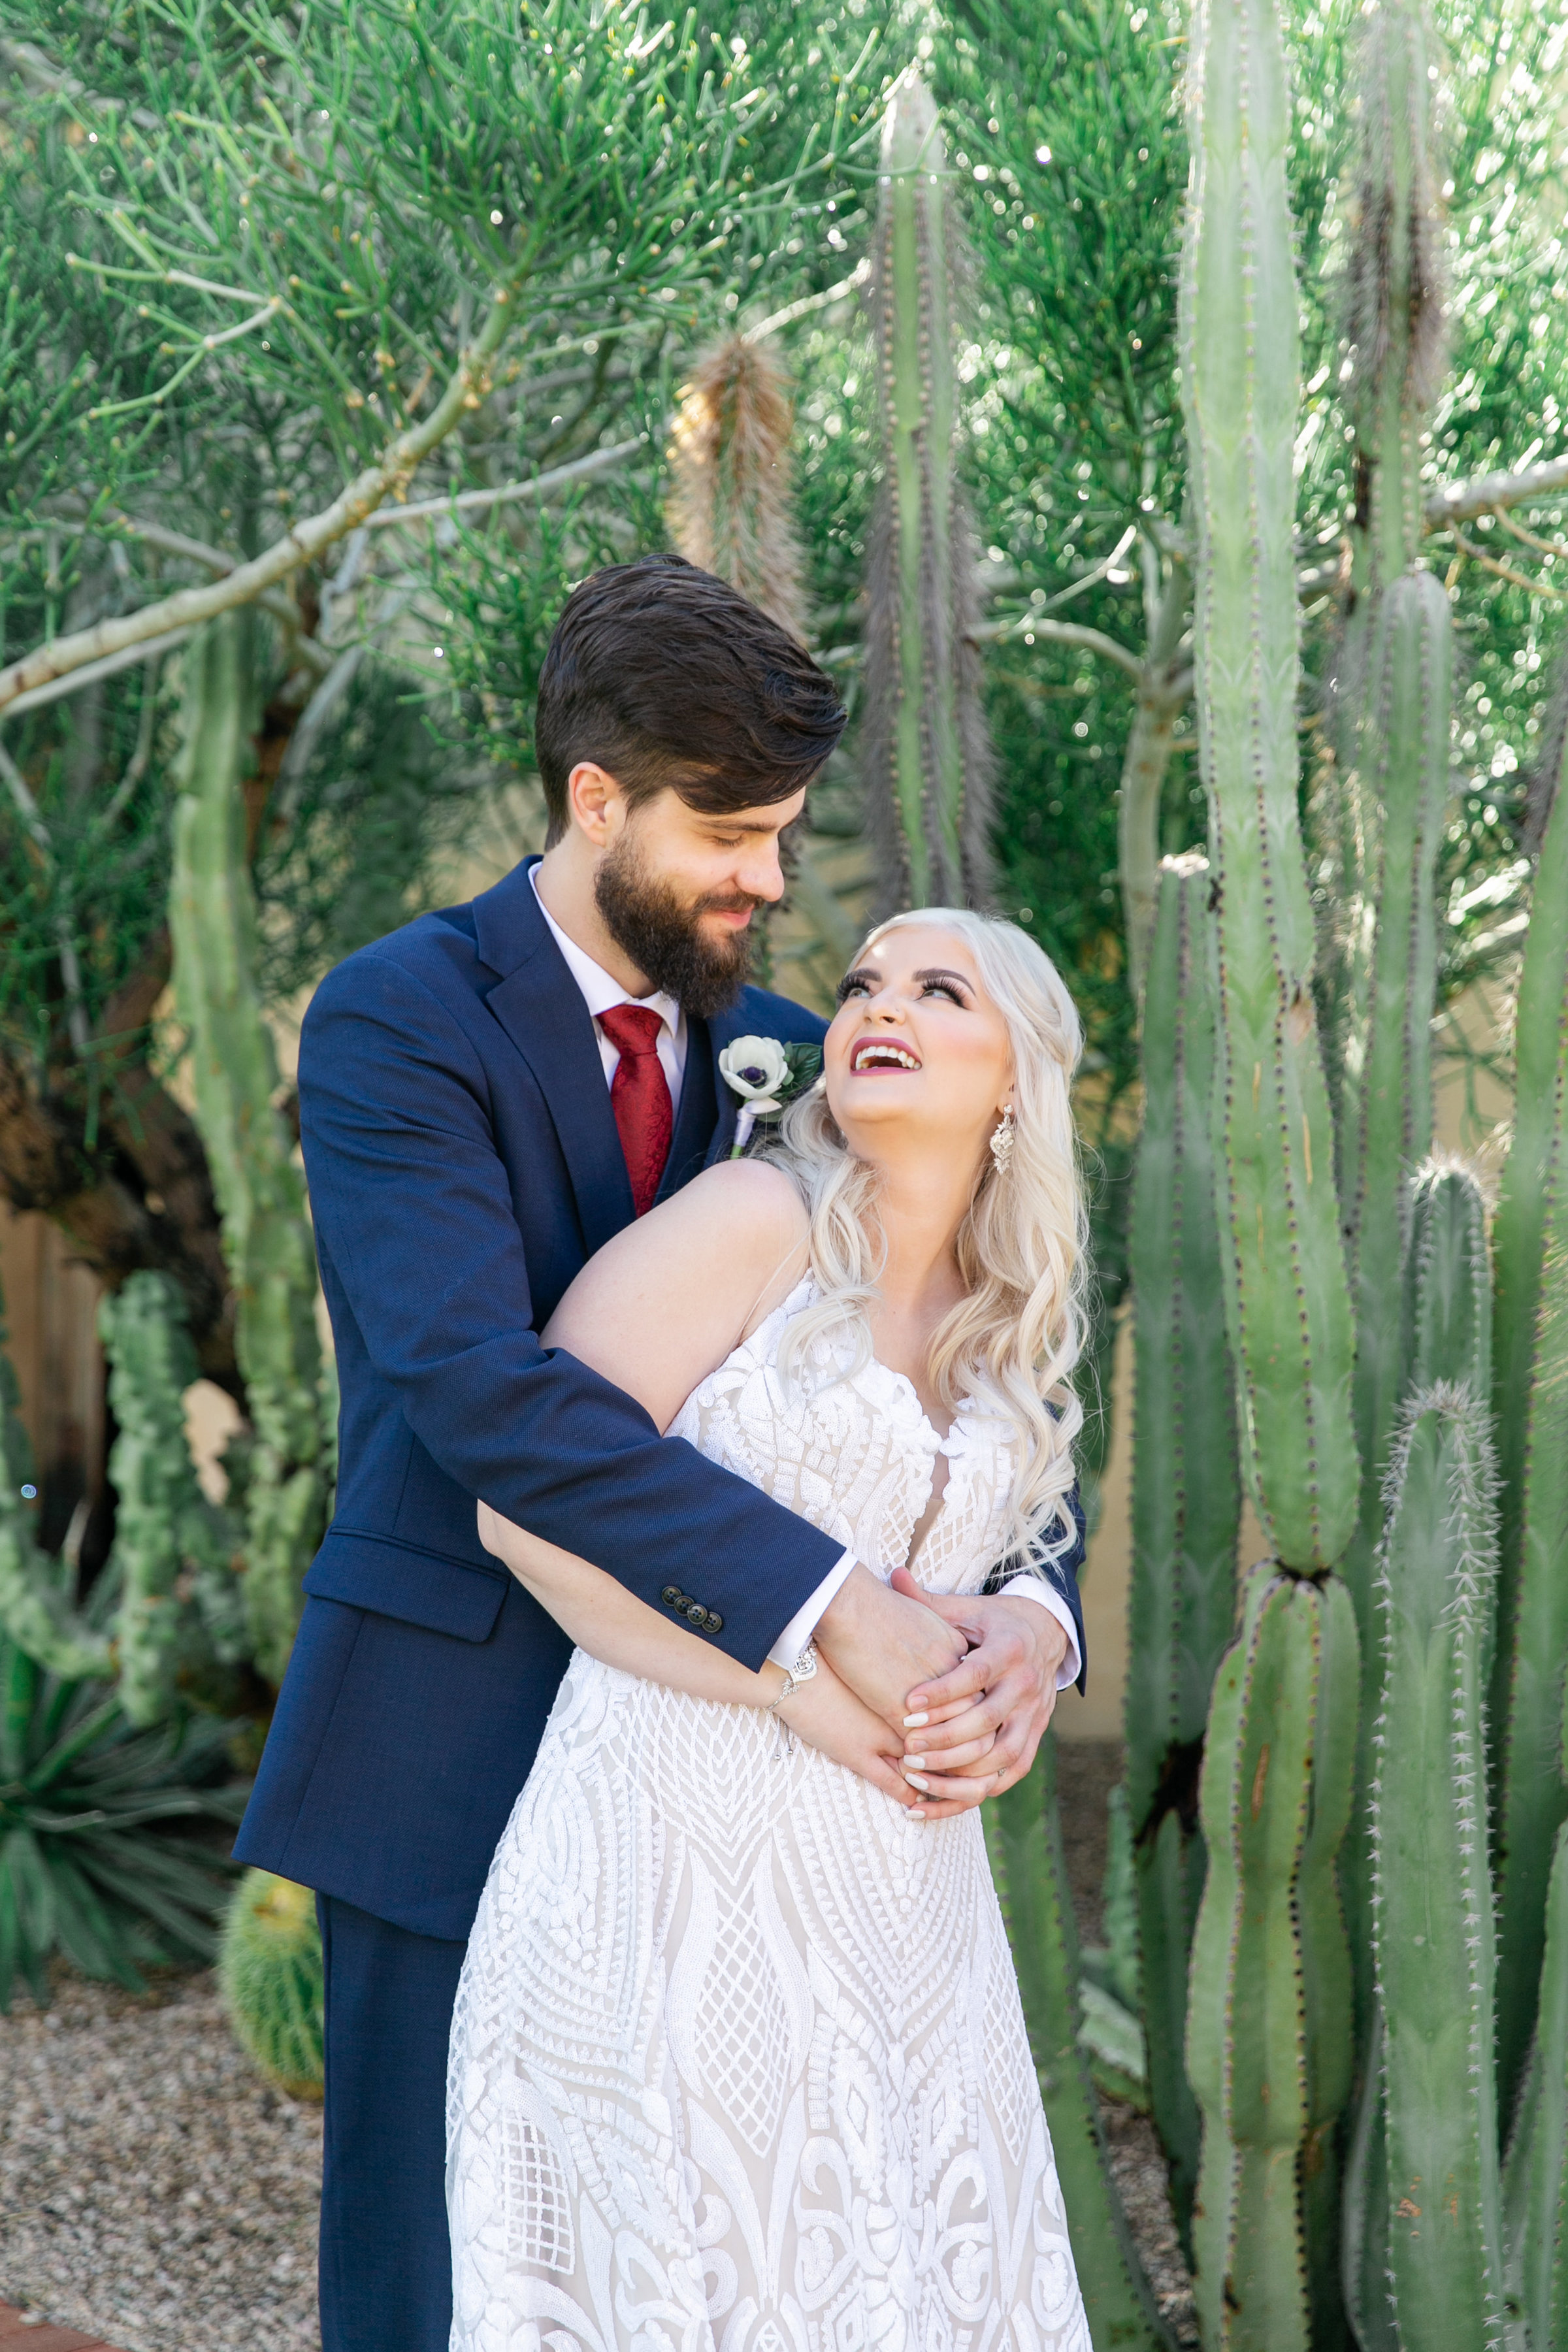 Karlie Colleen Photography - The Royal Palms Wedding - Some Like It Classic - Alex & Sam-162